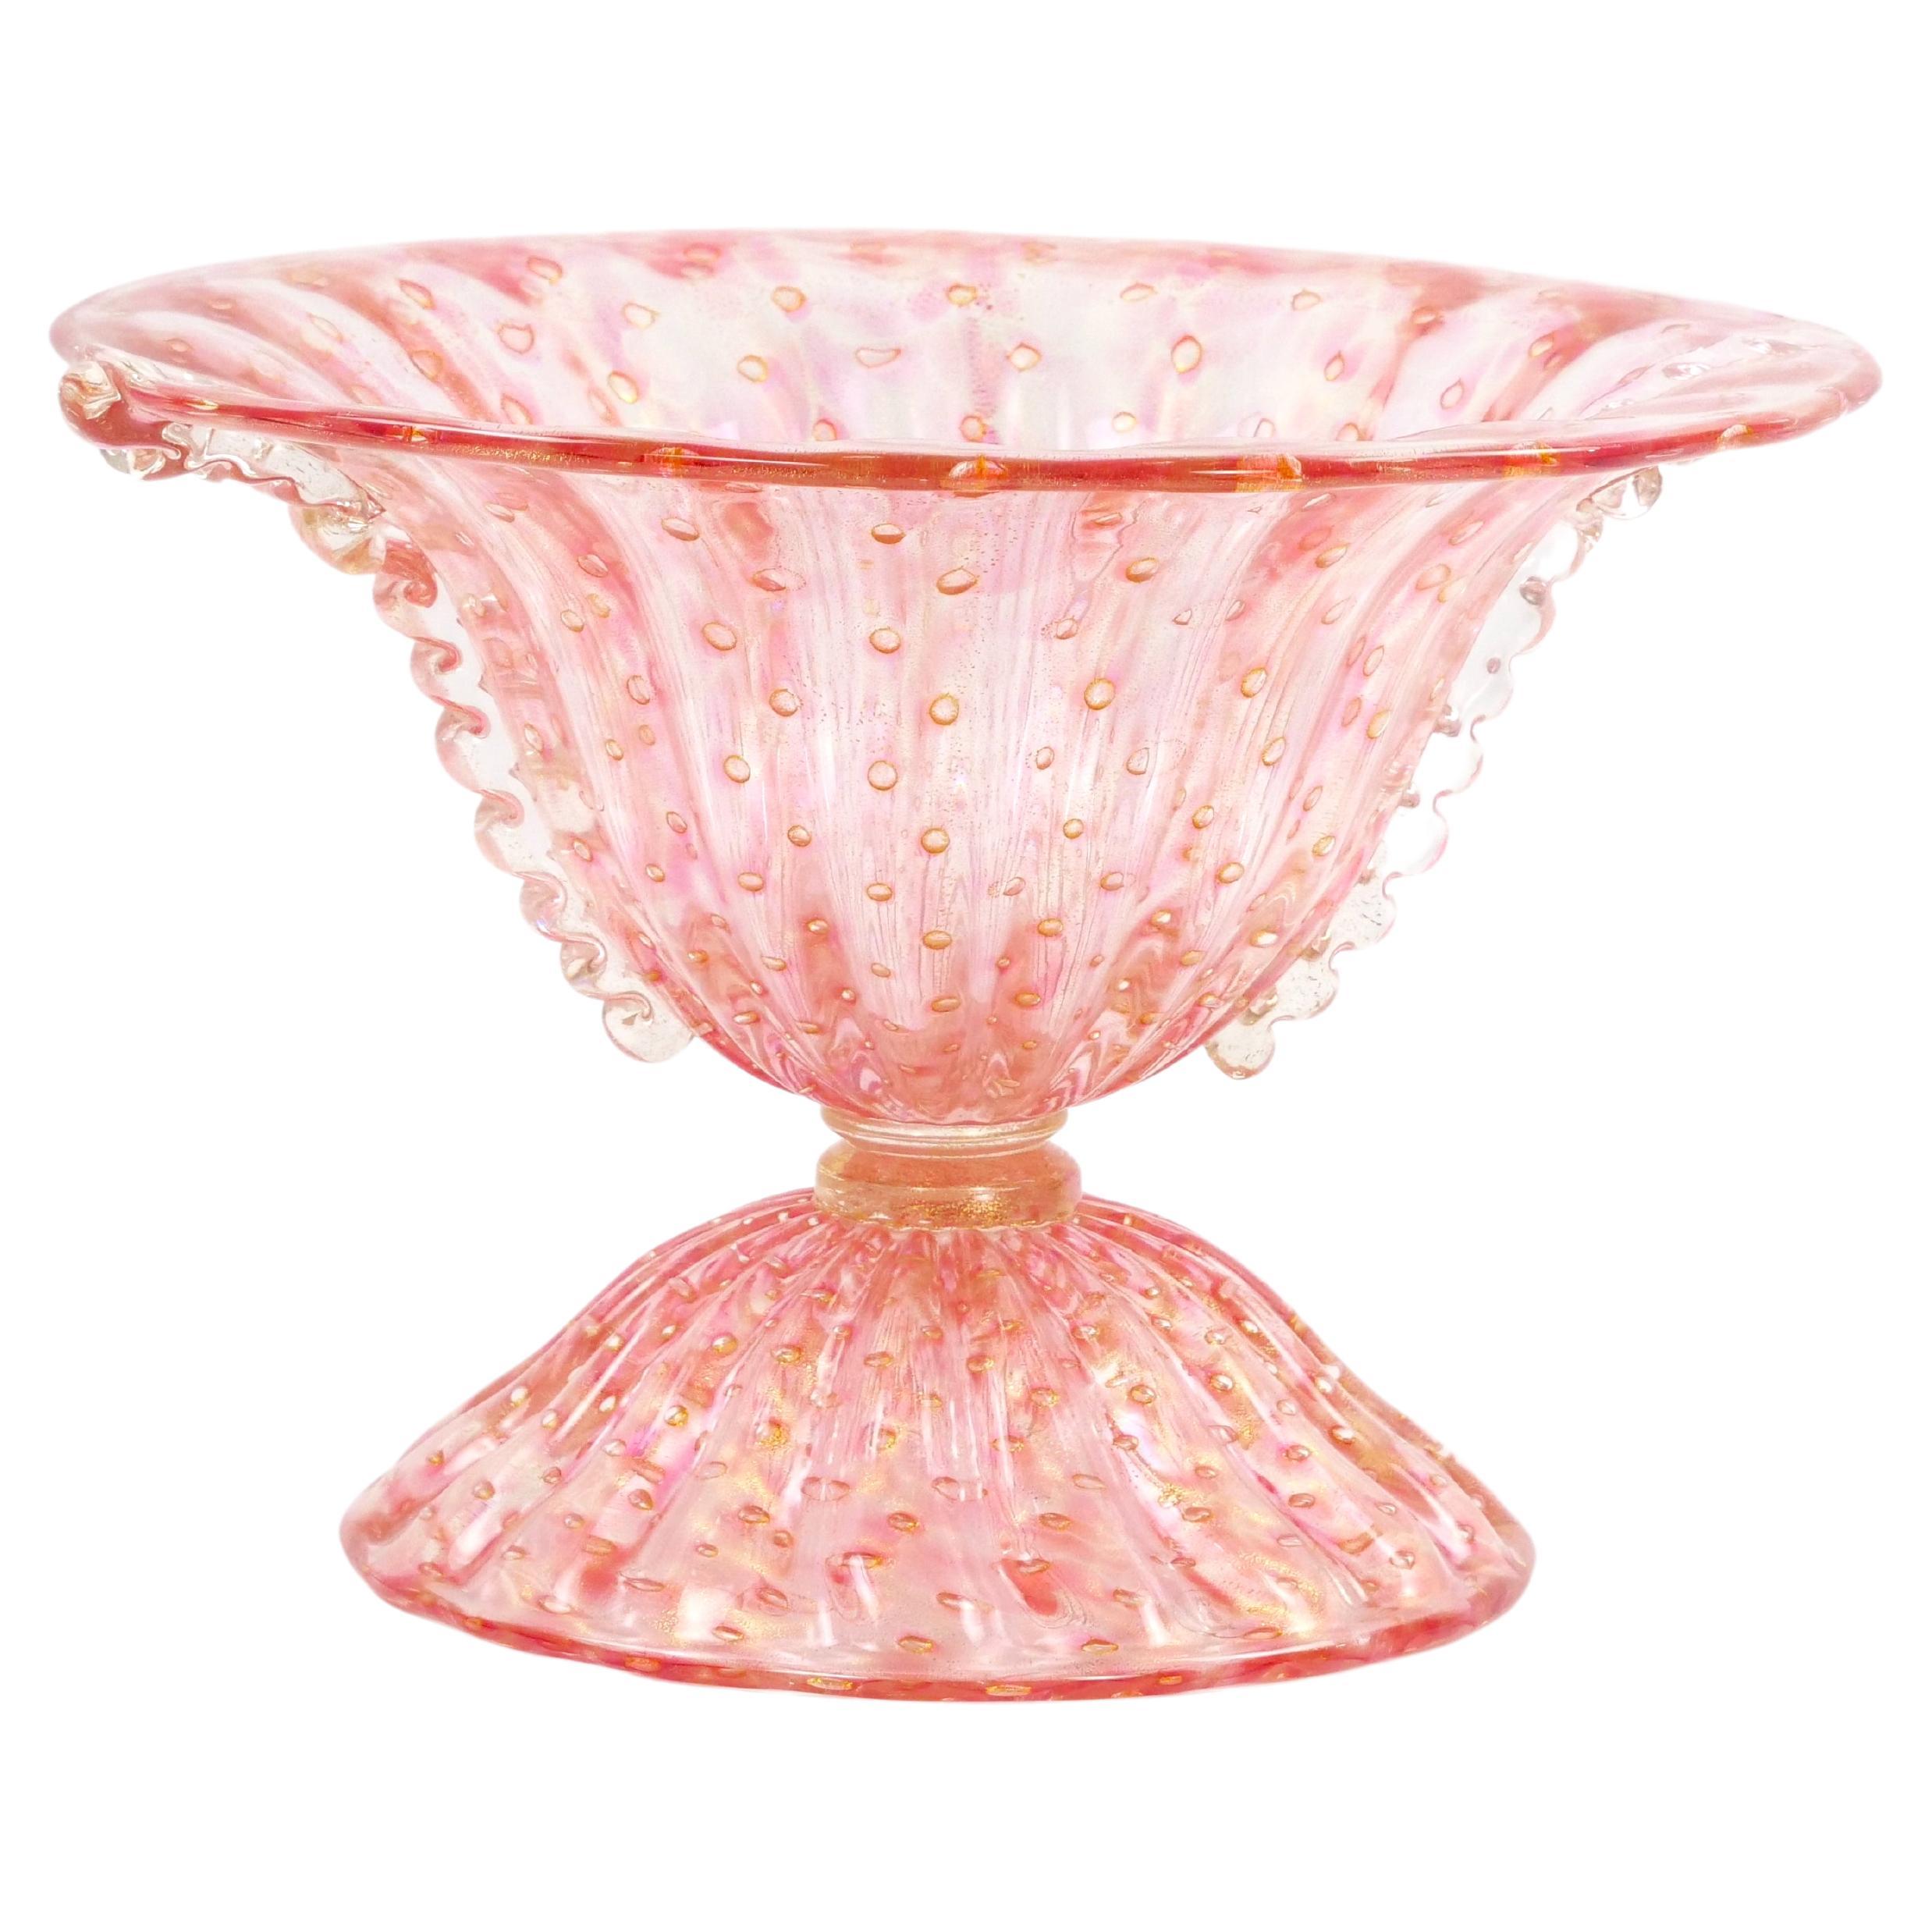 Murano Bullicante / Gold Infused Rose Colored Glass Tableware Centerpiece Bowl For Sale